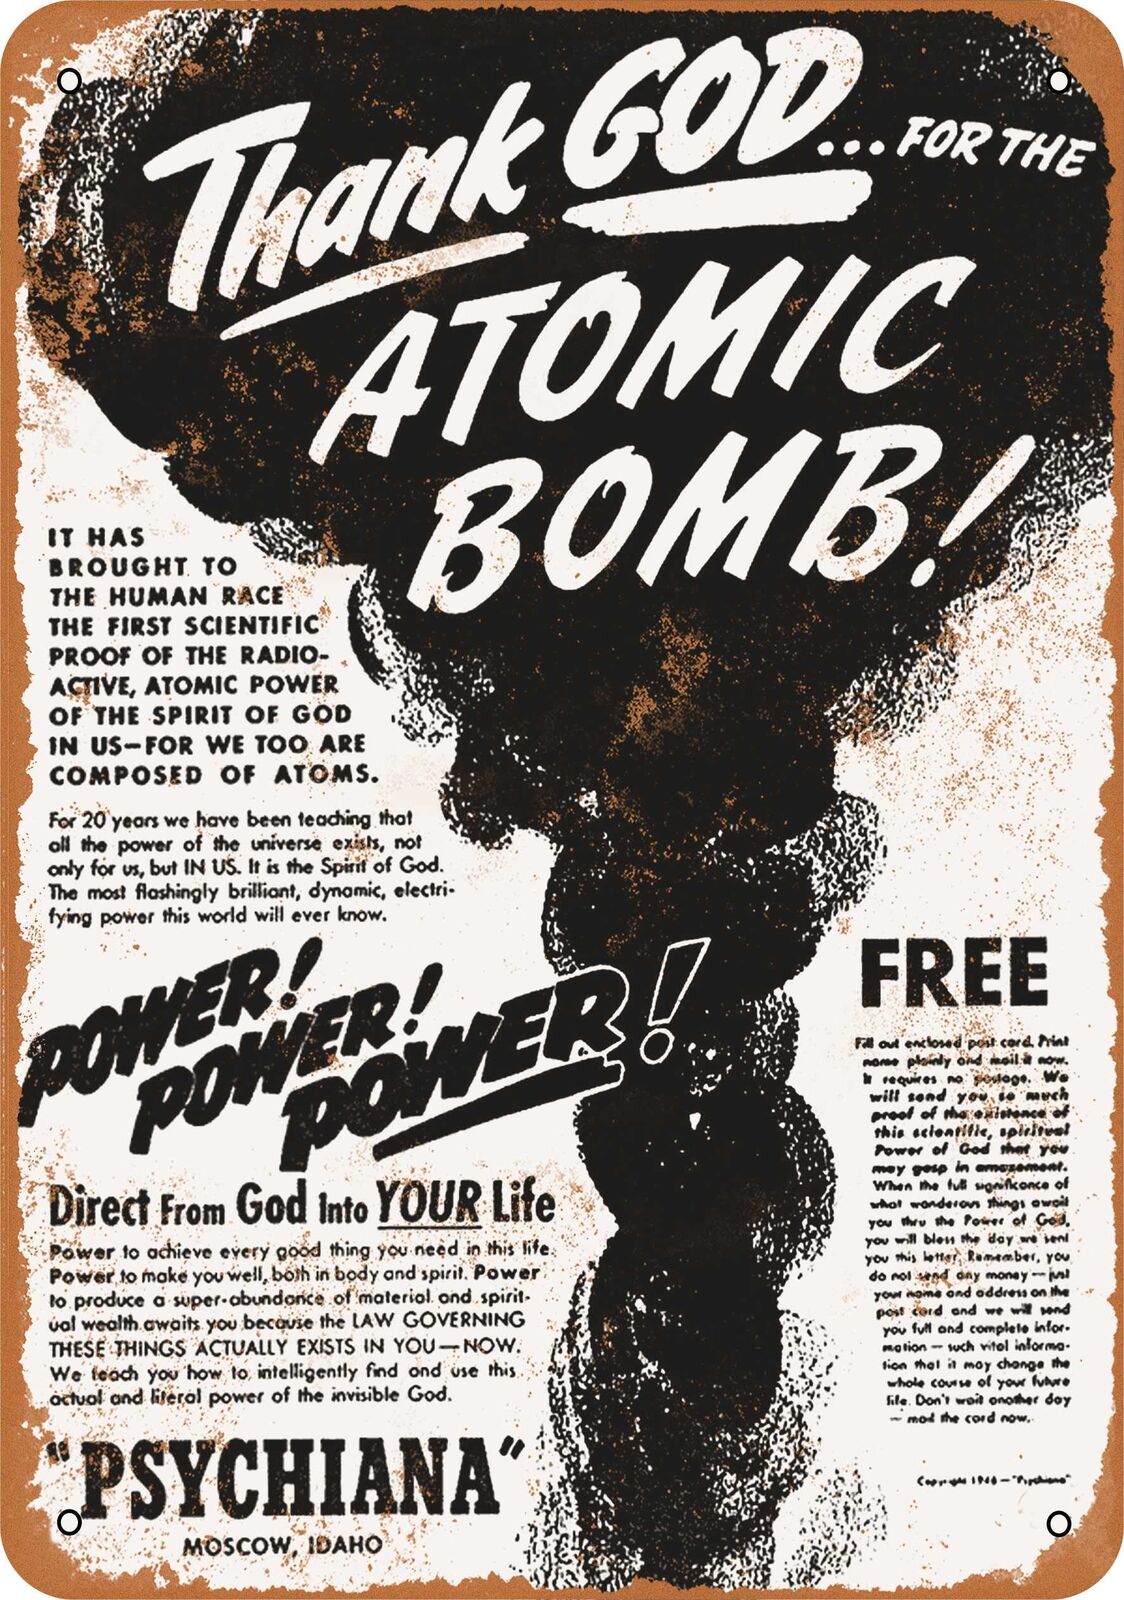 Metal Sign - 1946 Thank God for the Atomic Bomb - Vintage Look Reproduction